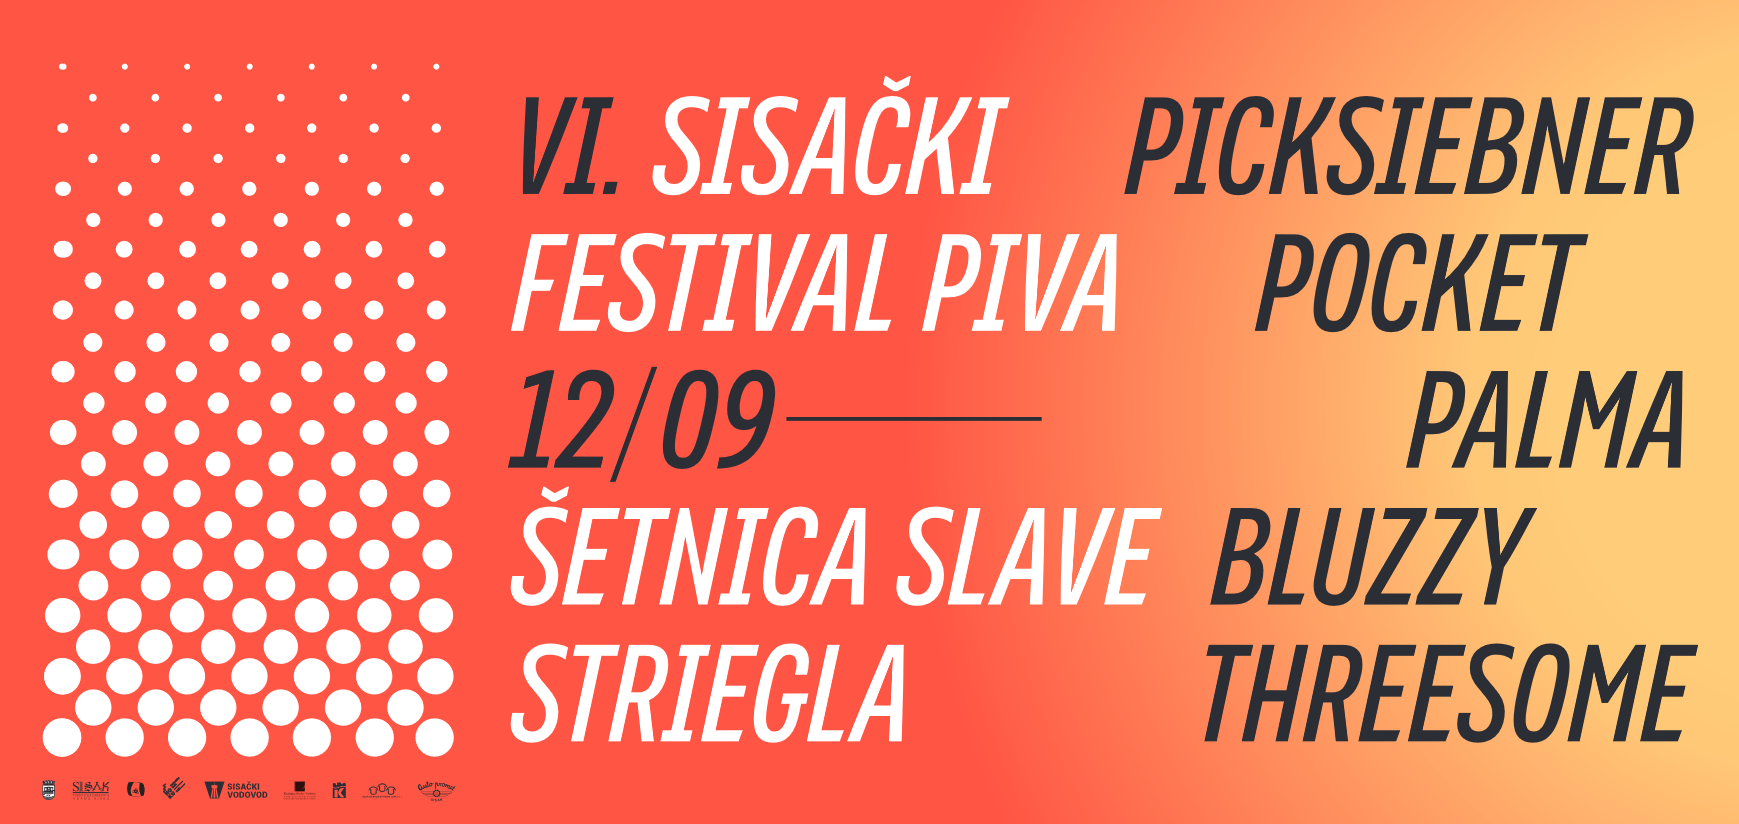 You are currently viewing 6. Sisački festival piva